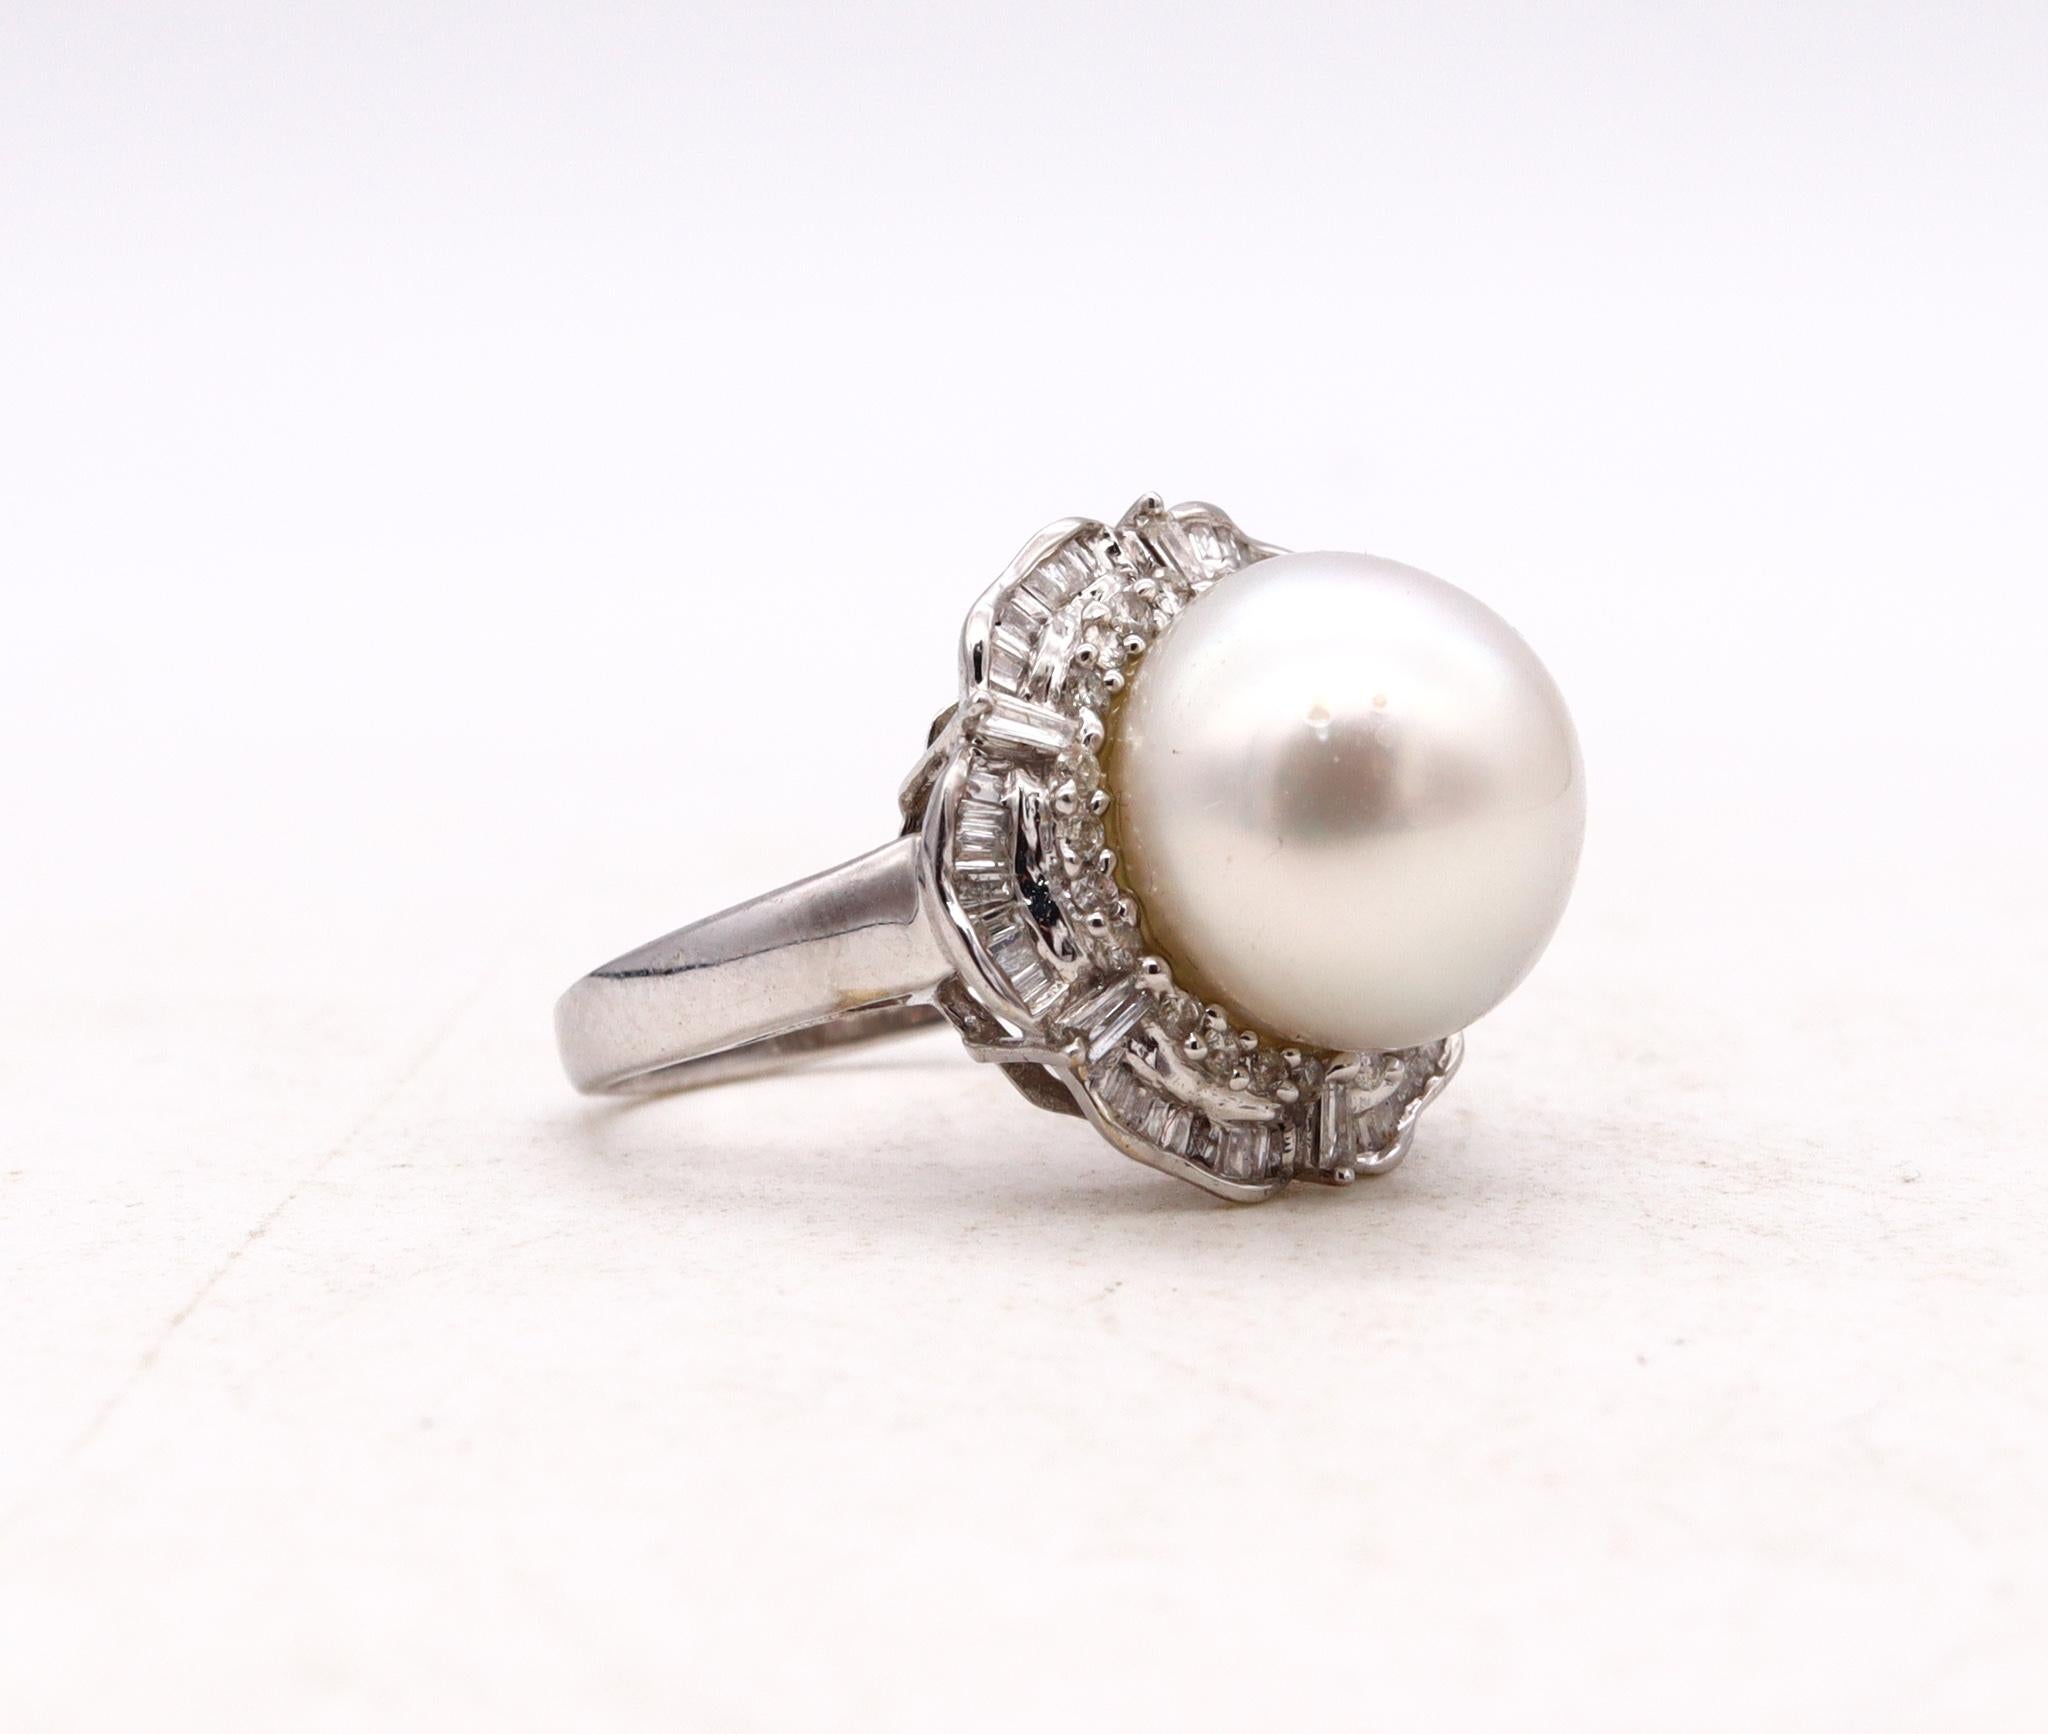 Italian Modern Classic Cocktail Ring In 18Kt Gold 1.21 Cts Diamonds White Pearl For Sale 1